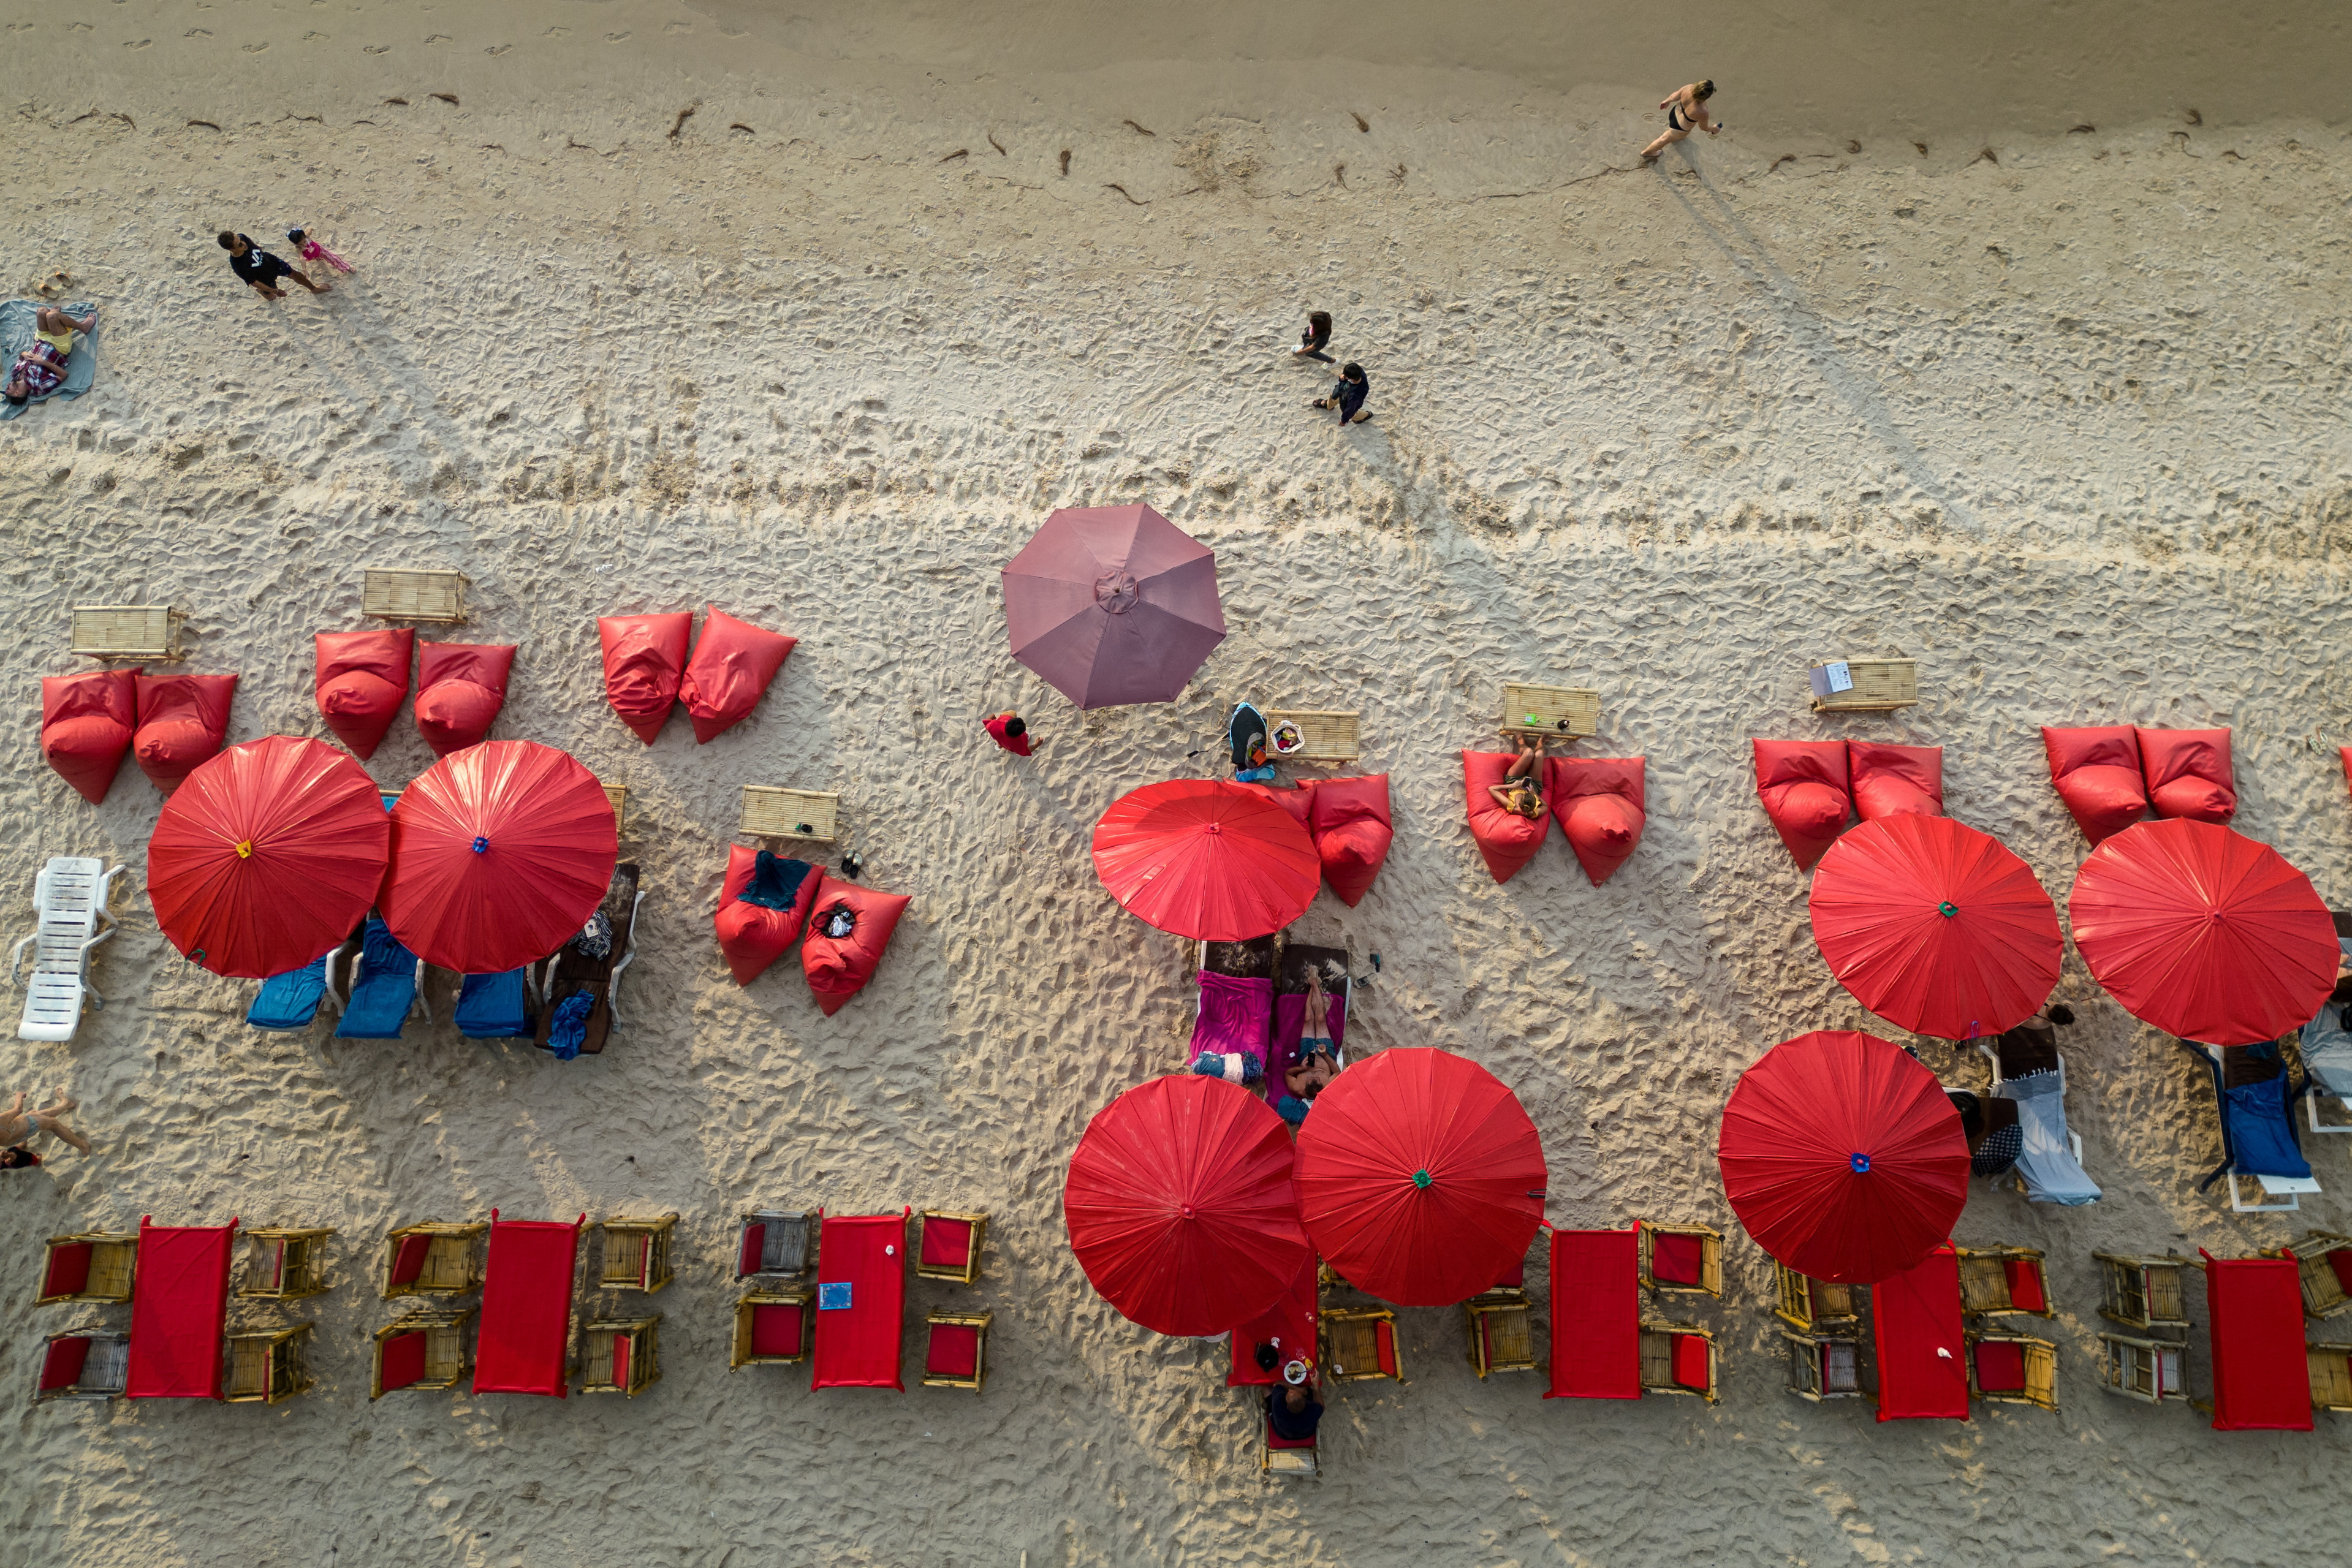 Umbrellas are seen in a restaurant as tourists enjoy a beach in the island of Phuket in Thailand